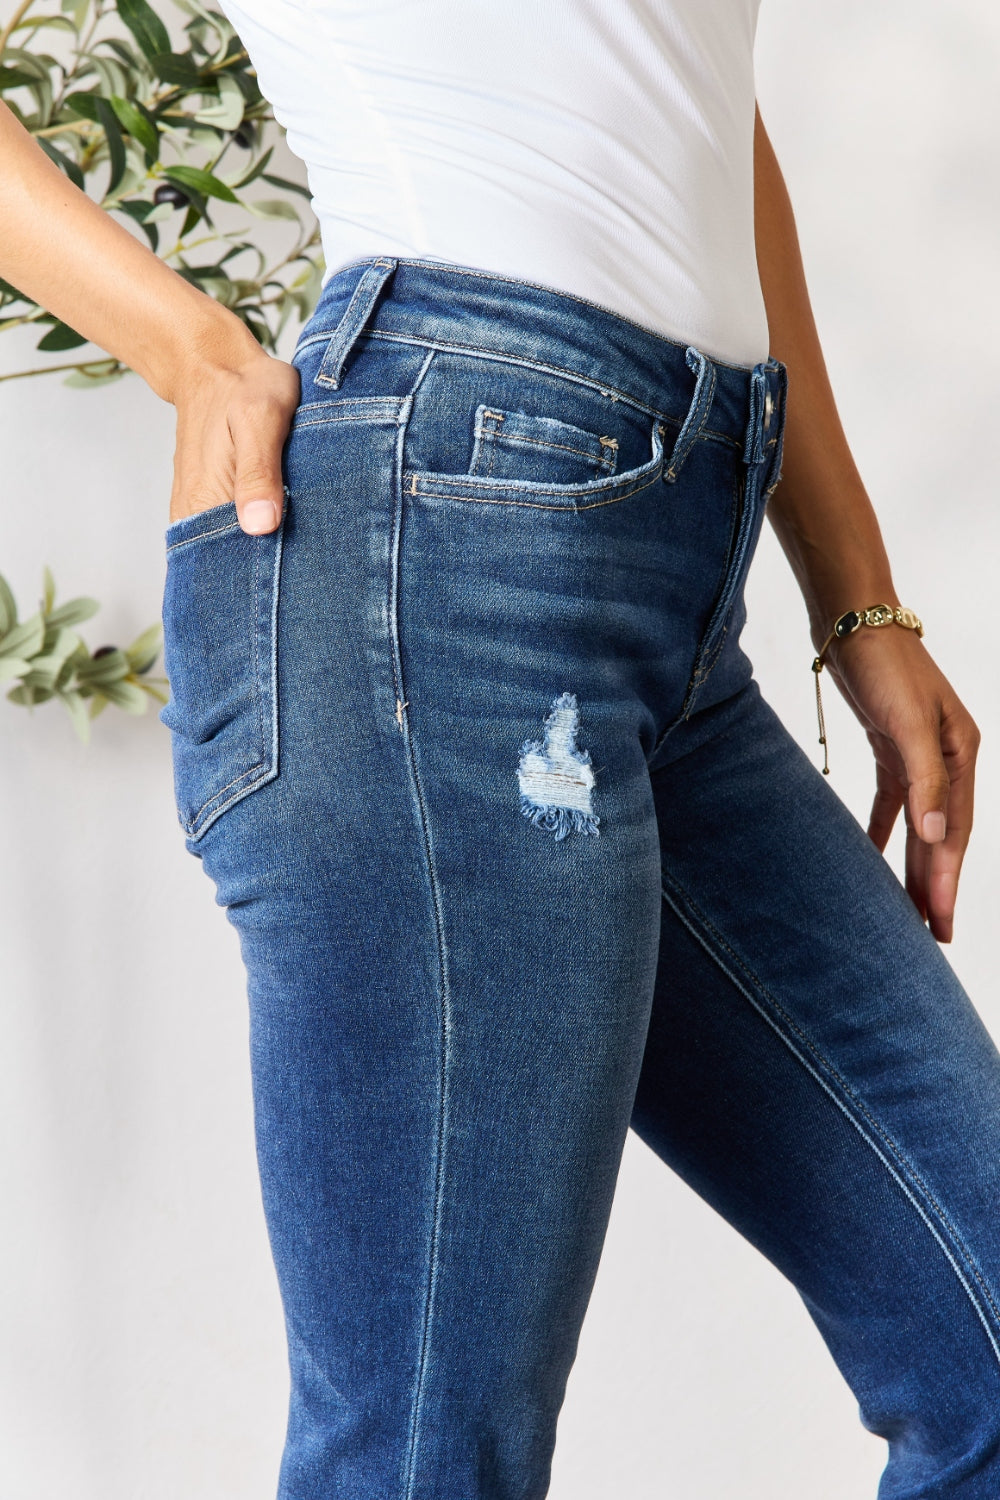 BAYEAS Distressed Detailing Frayed Edges Cropped Jeans